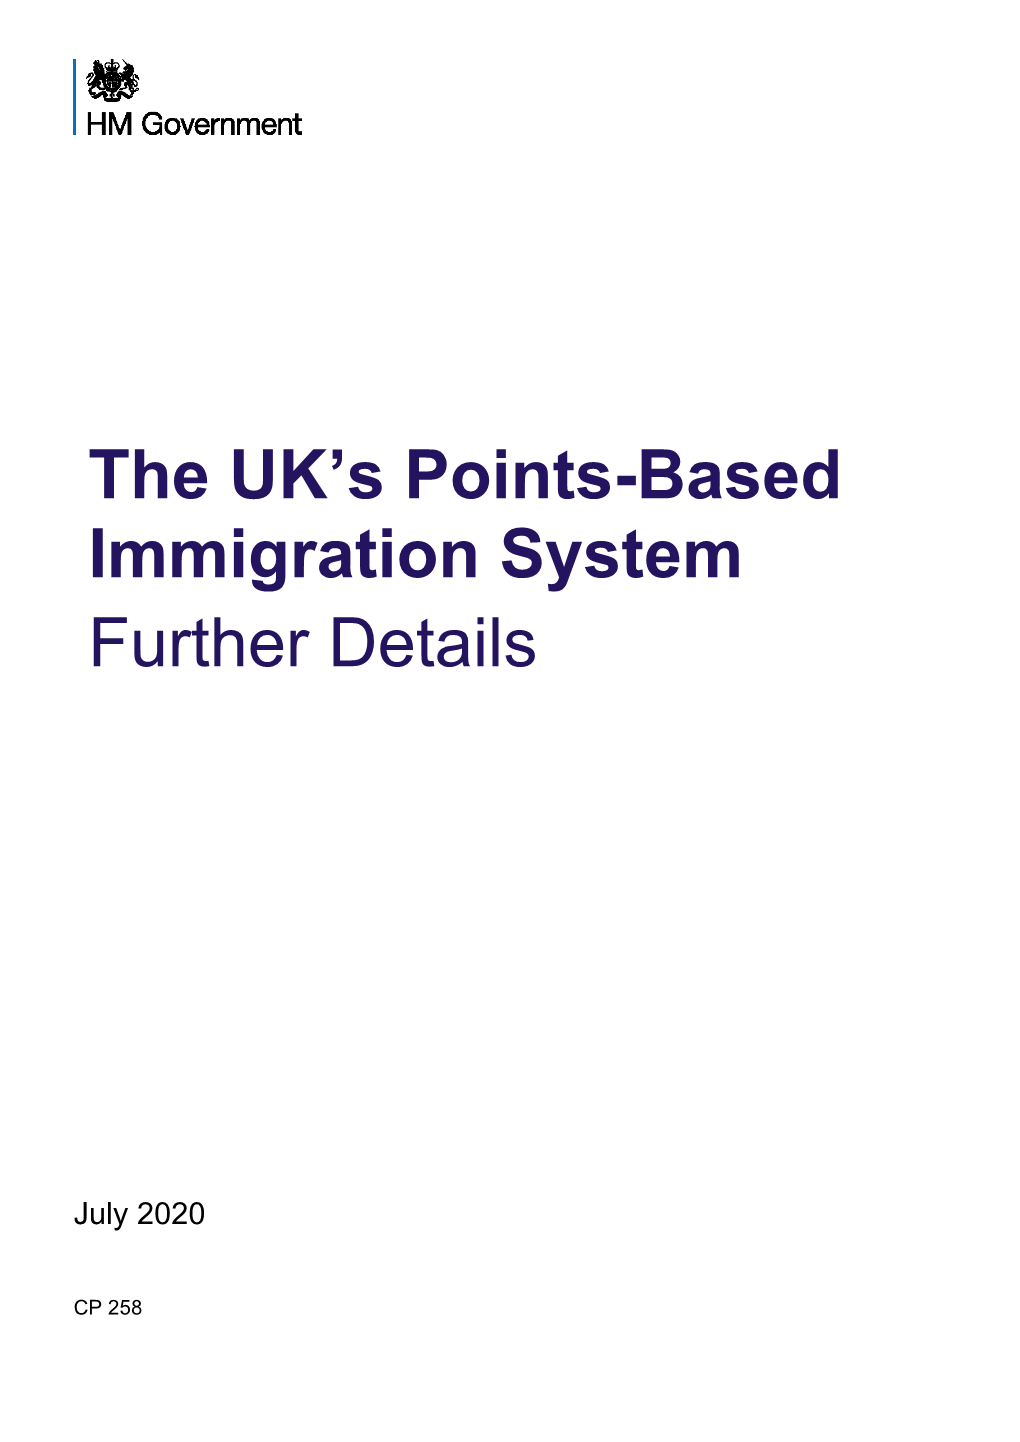 The UK's Points-Based Immigration System – Further Details